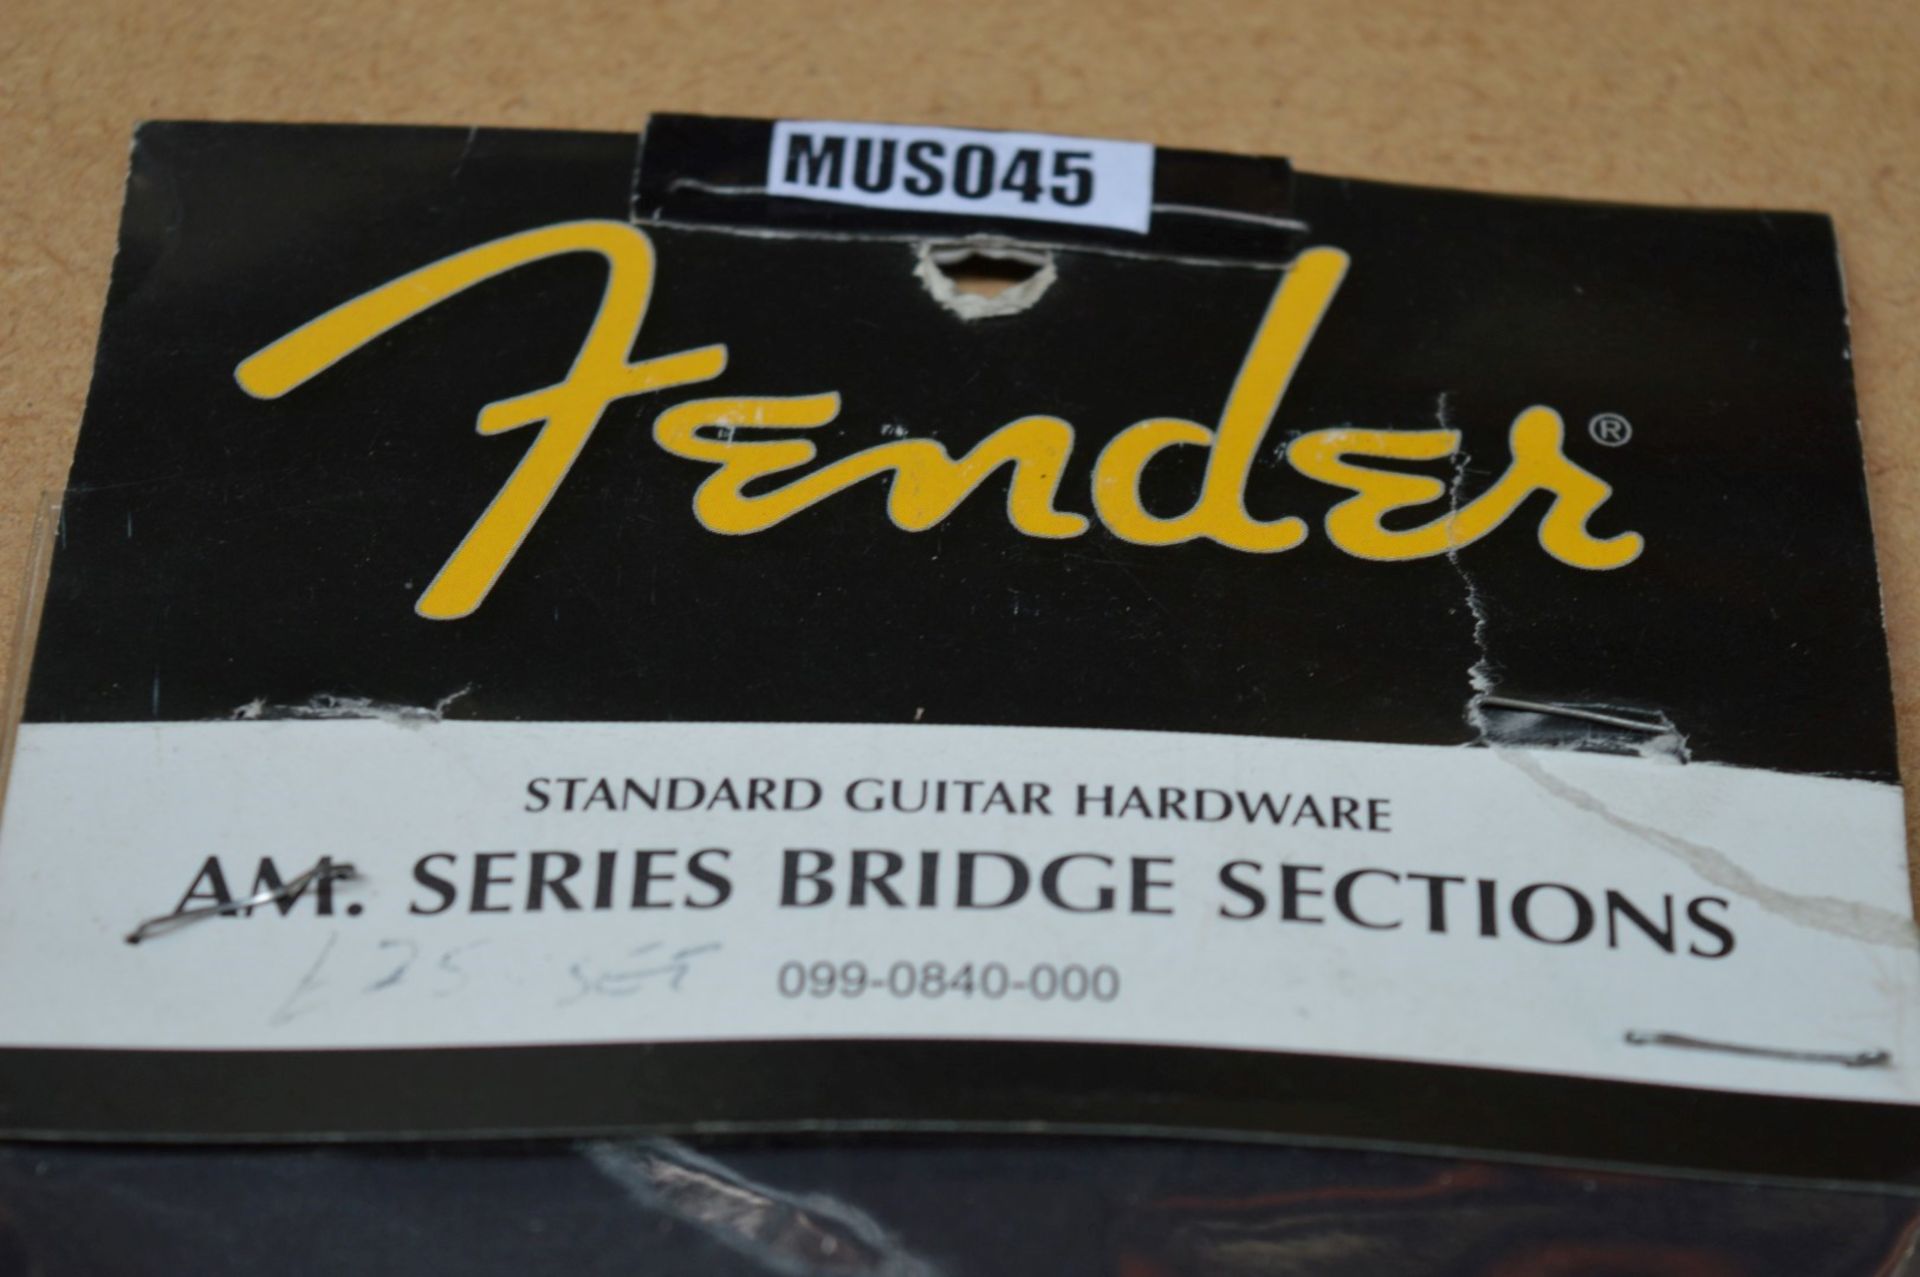 1 x Genuine Fender AM Series Bridge Sections - Part No 099-0840-000 - CL020 - Made in the USA - - Image 2 of 4